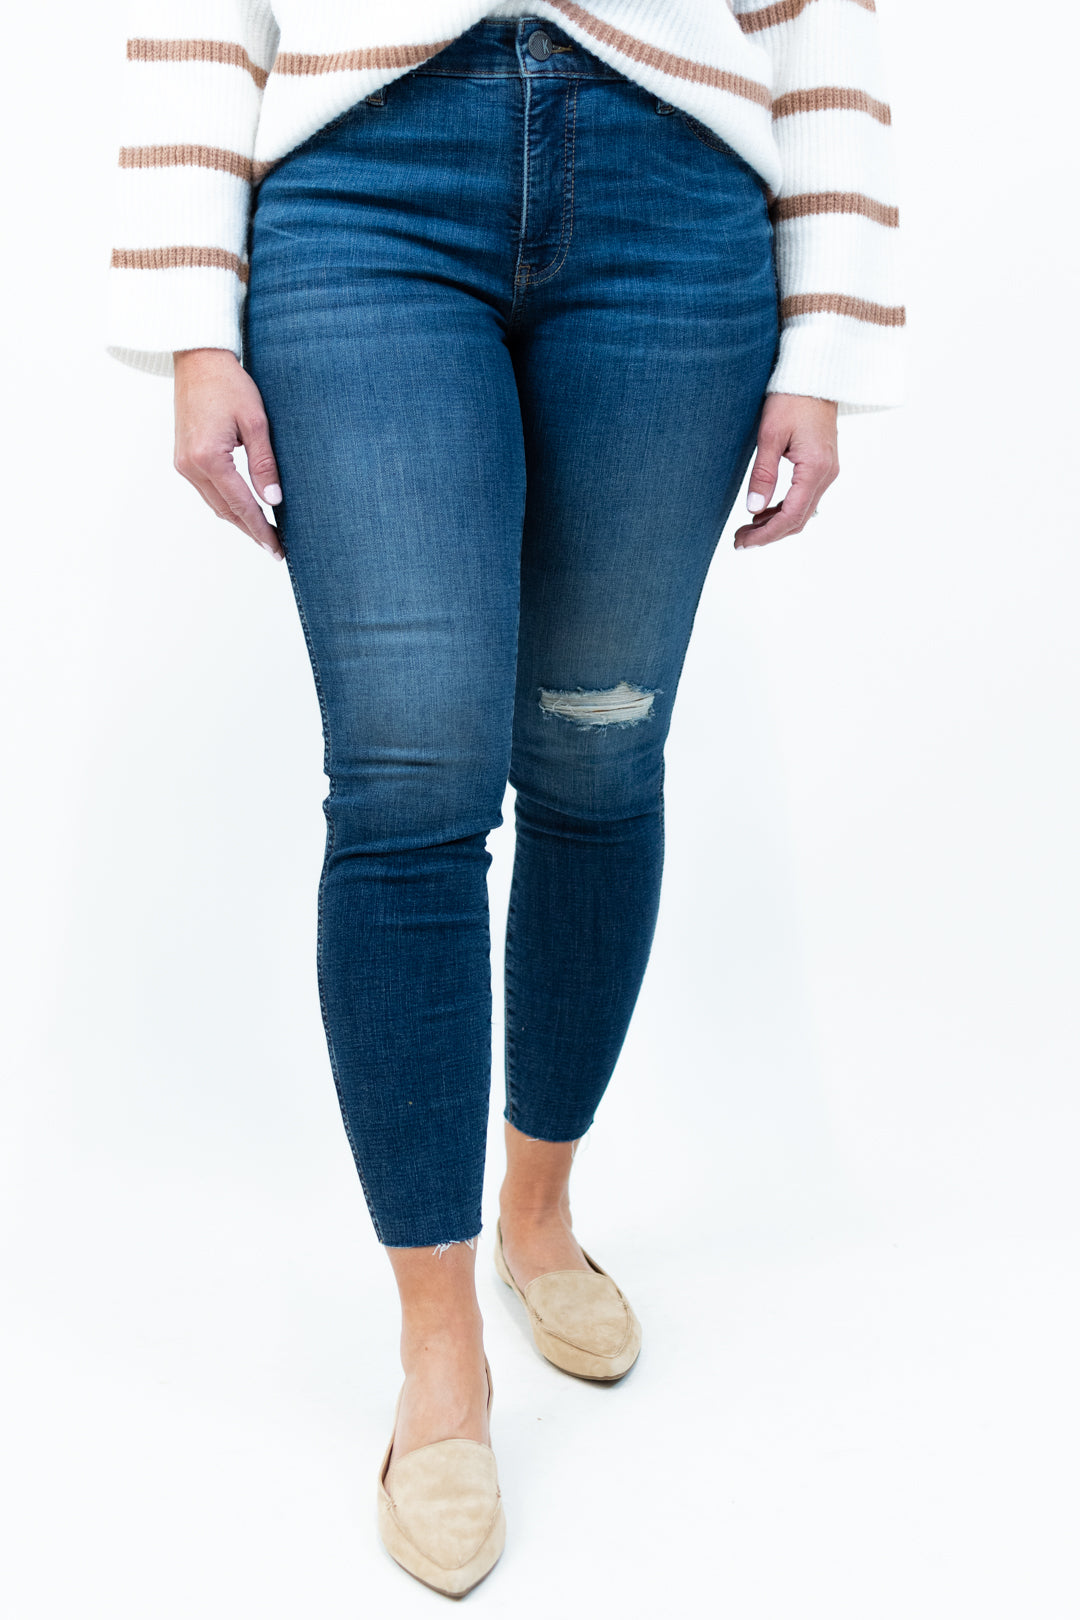 Kut From the Kloth Wakeful Donna Skinny Jean | FINAL SALE